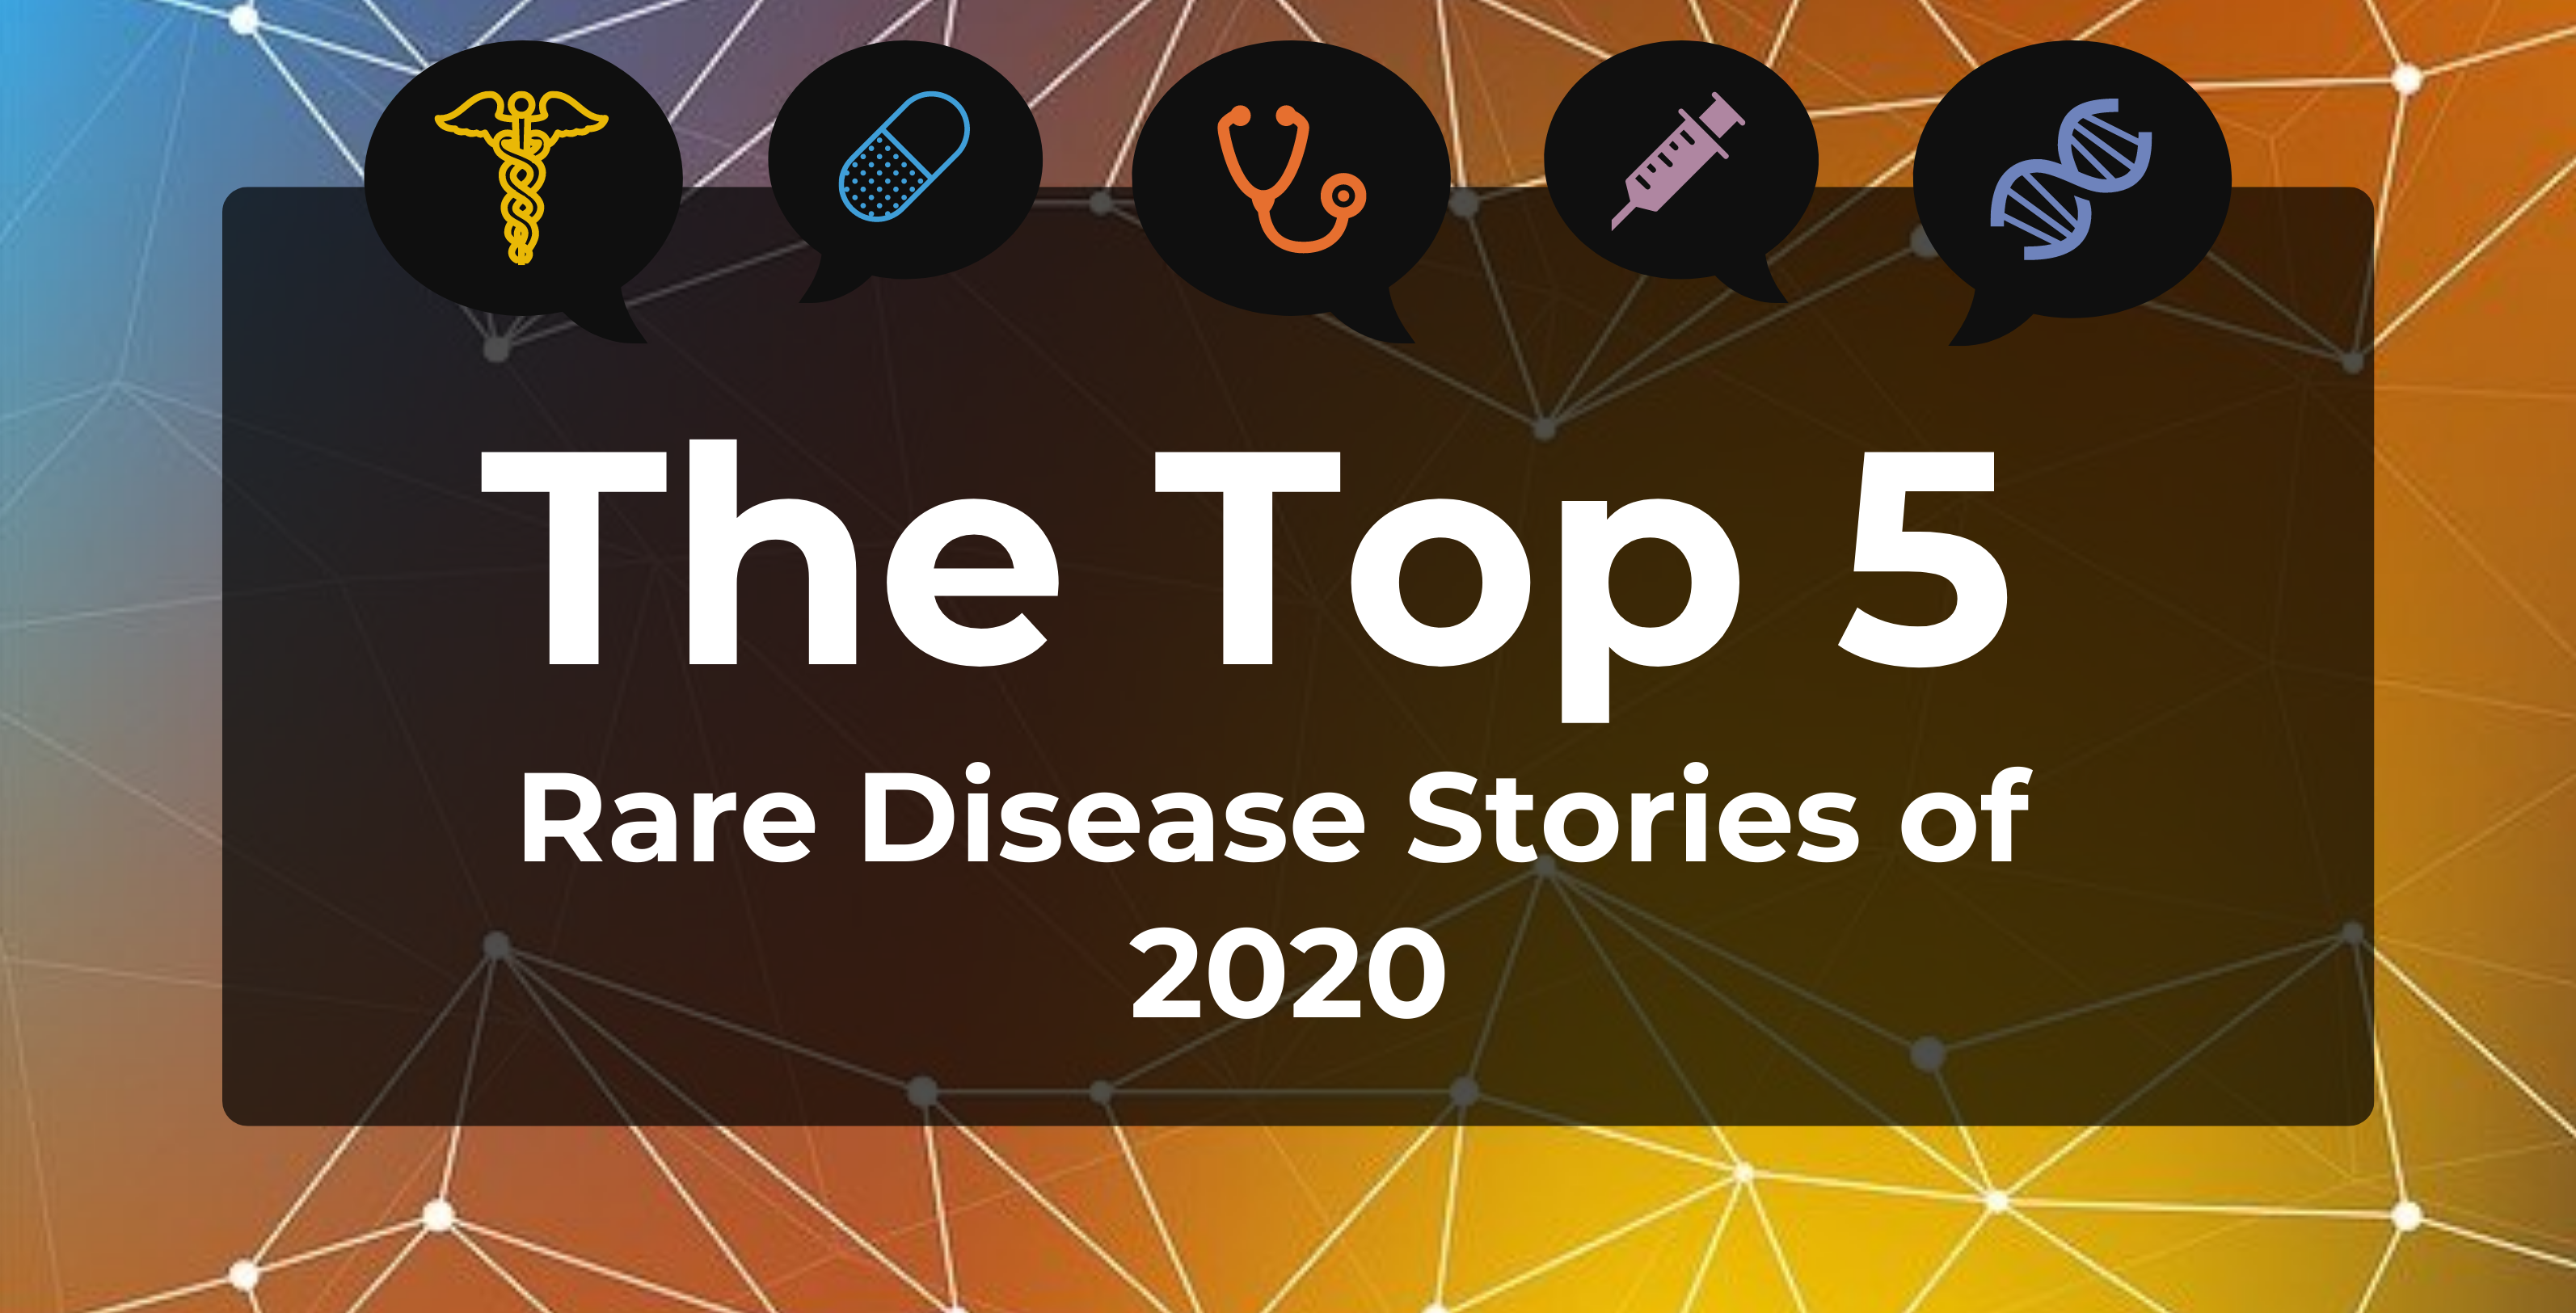 Top 5 Most-Read Rare Disease Stories of 2020